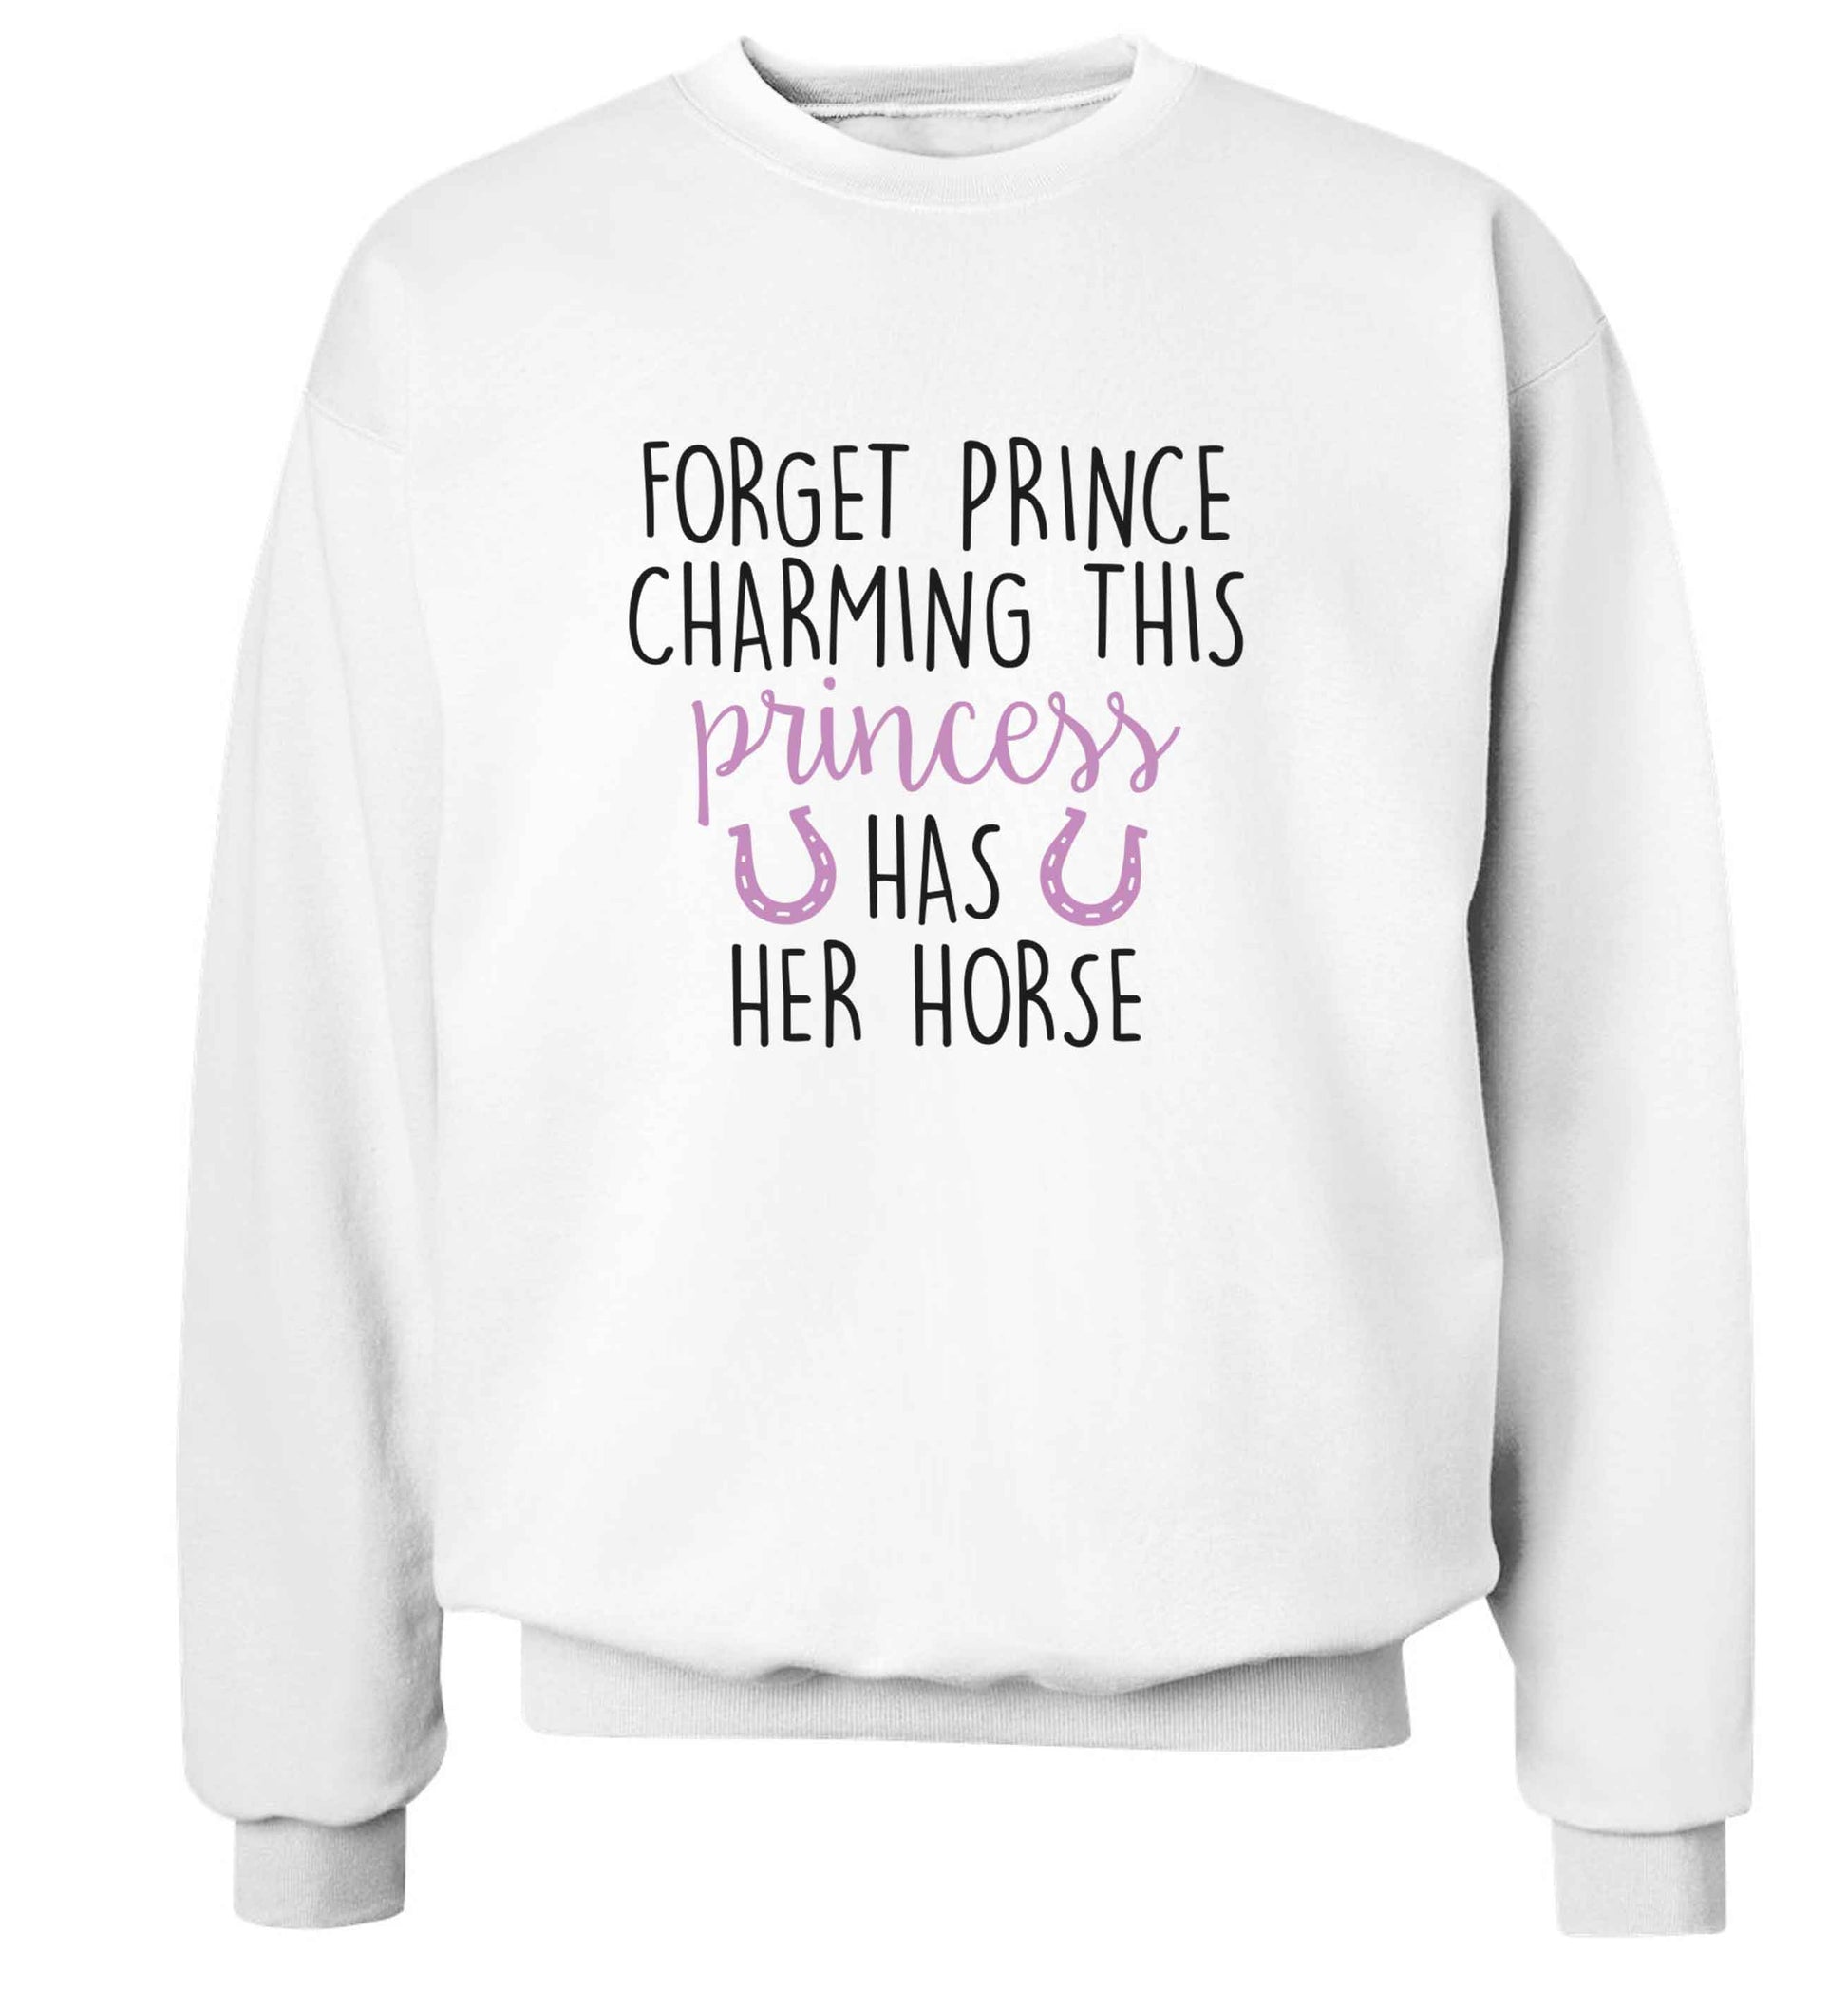 Forget prince charming this princess has her horse adult's unisex white sweater 2XL